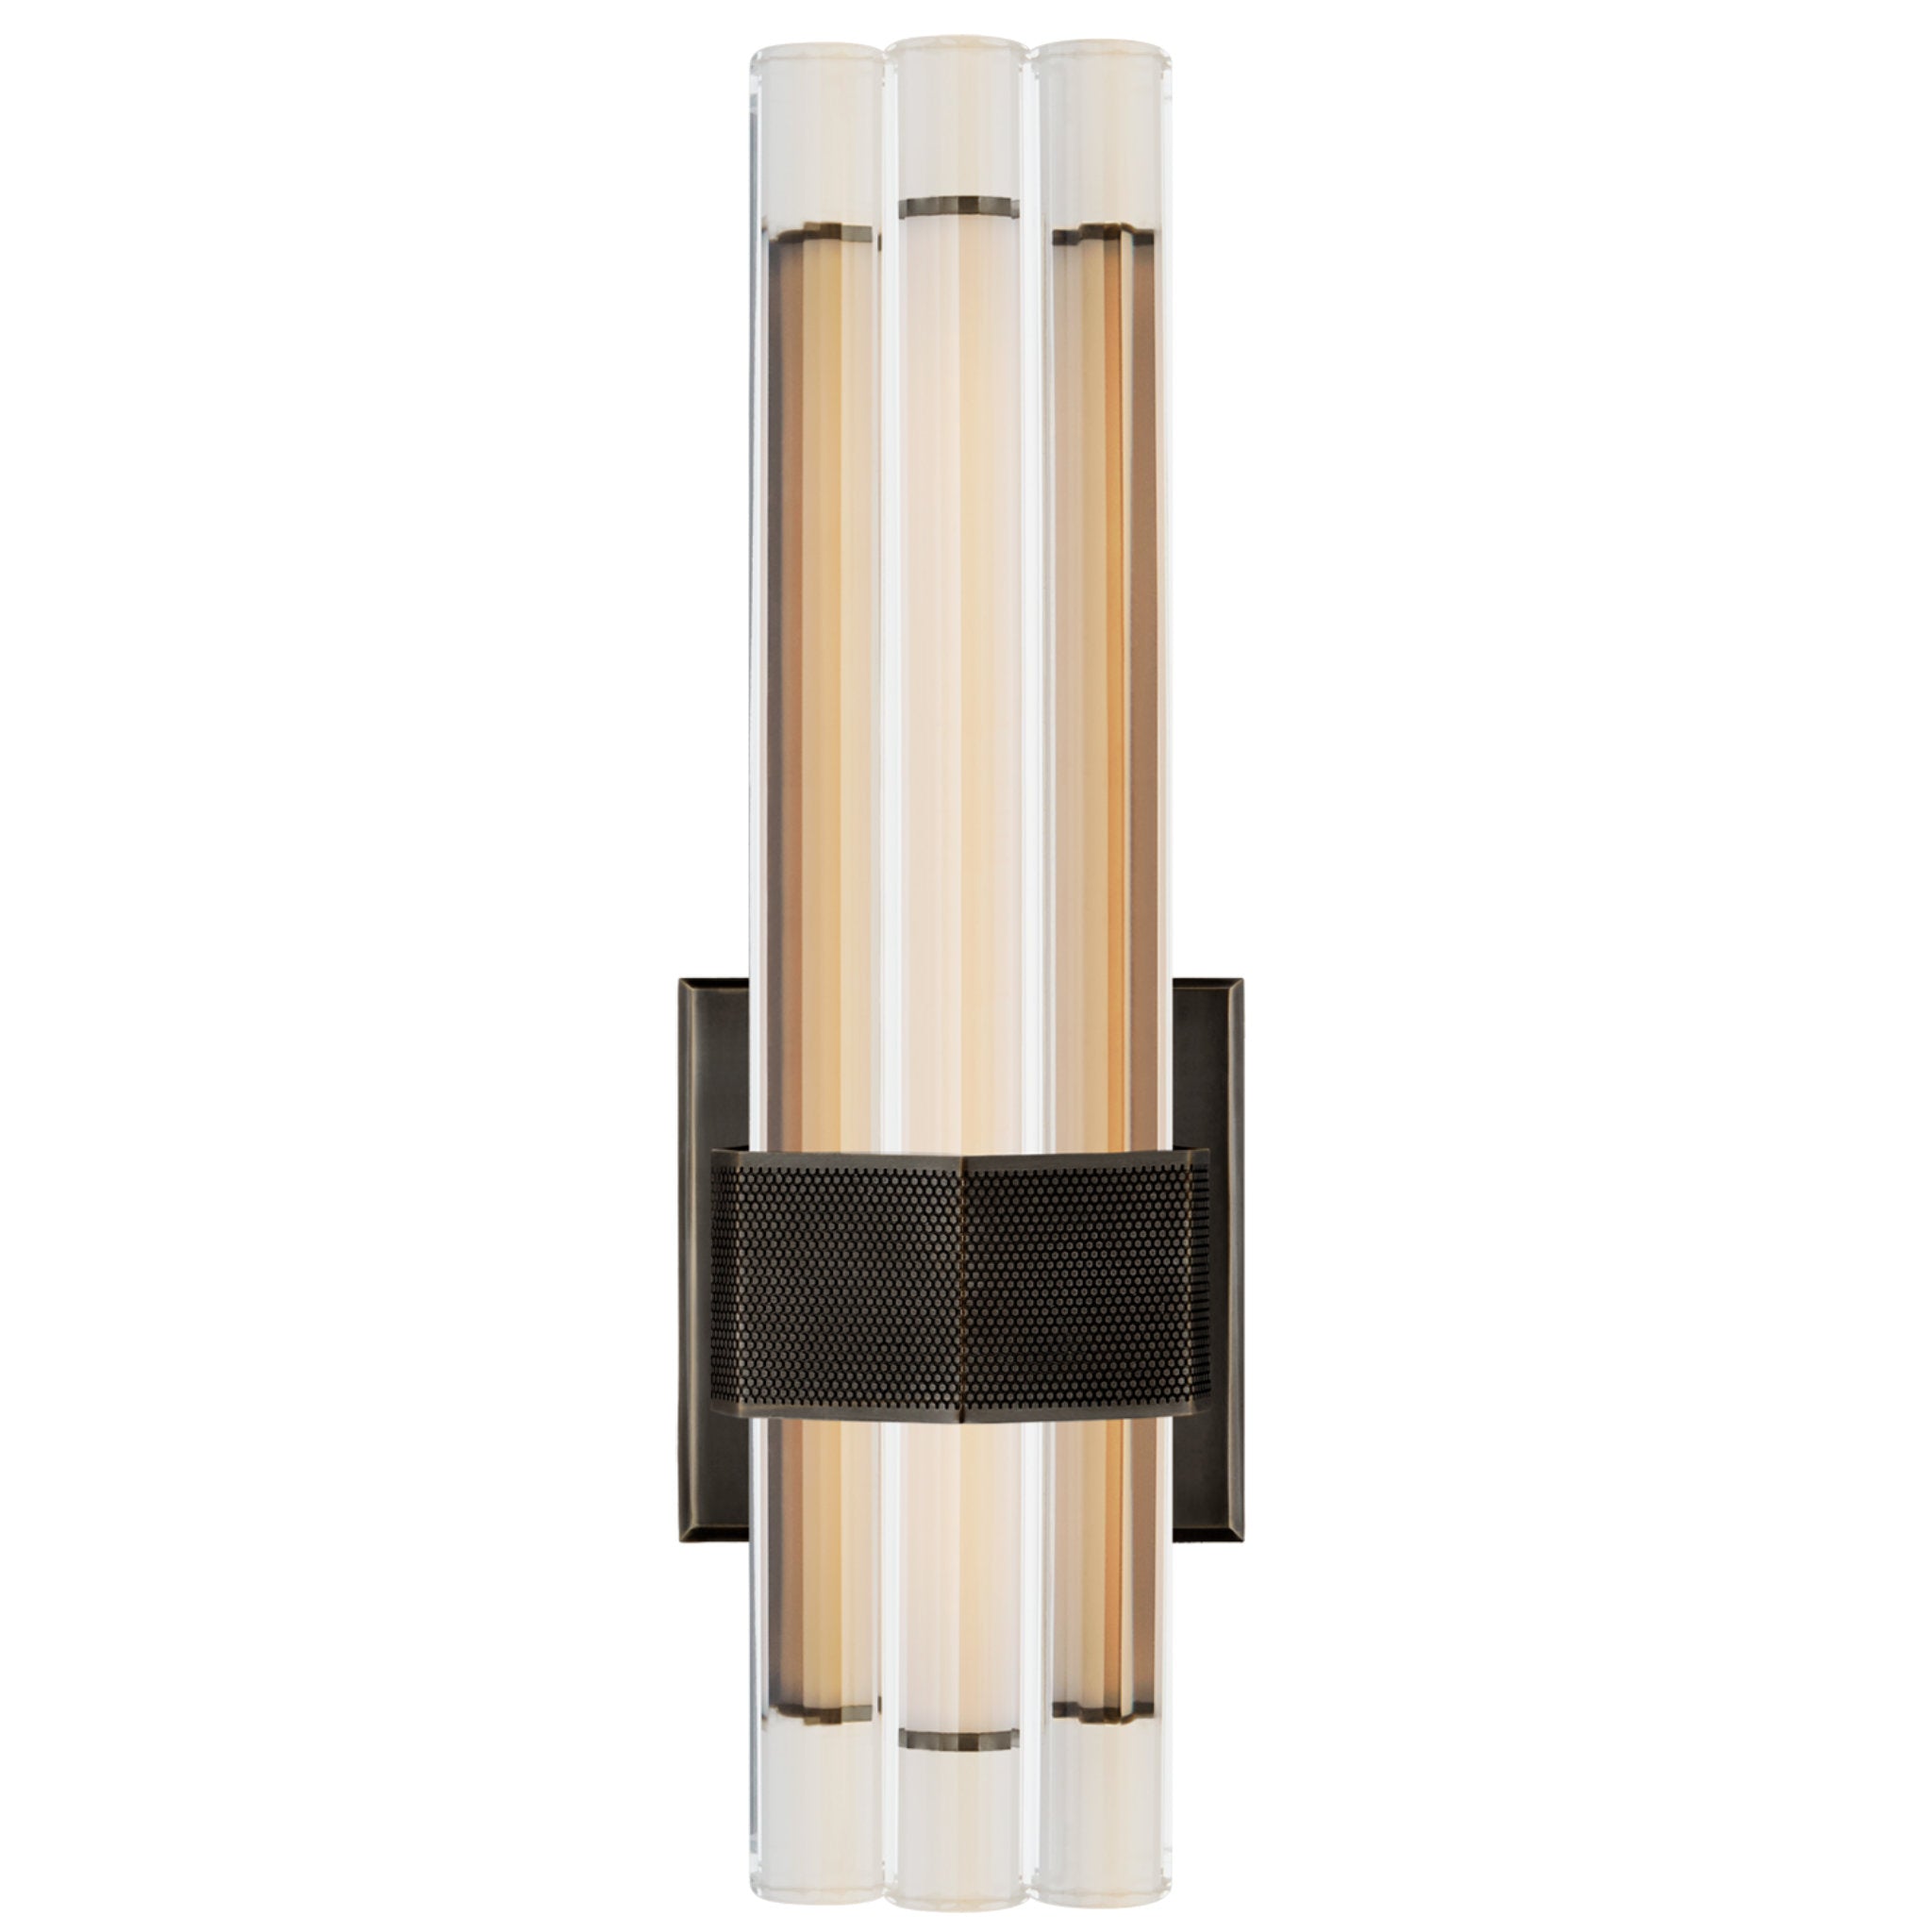 Lauren Rottet Fascio 14" Asymmetric Sconce in Bronze with Crystal